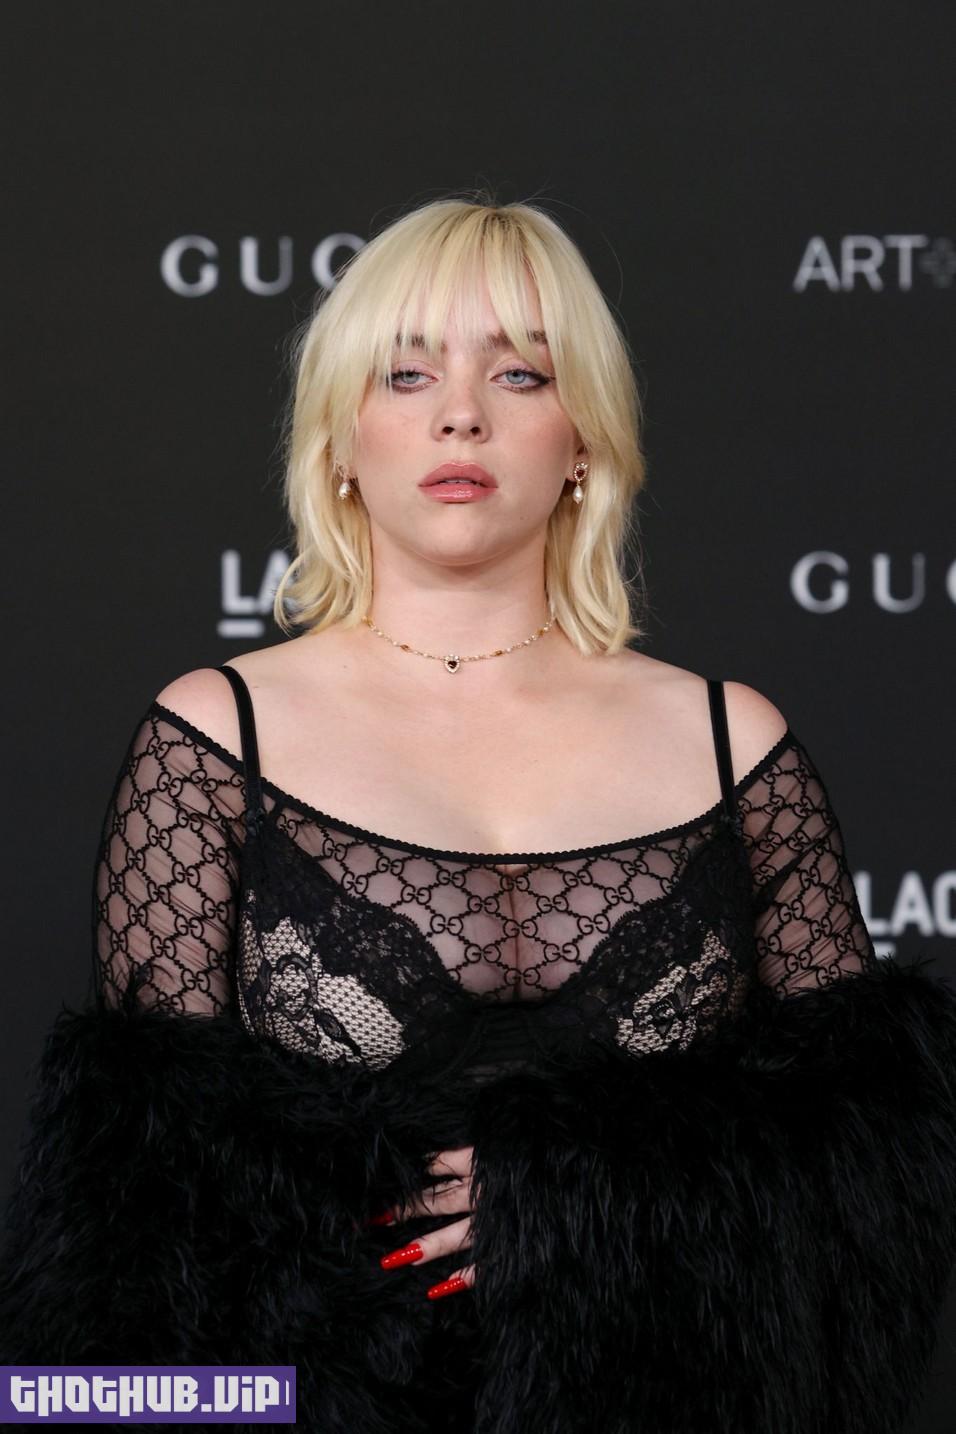 Billie Eilish Hot In A Revealing Outfit 13 Photos